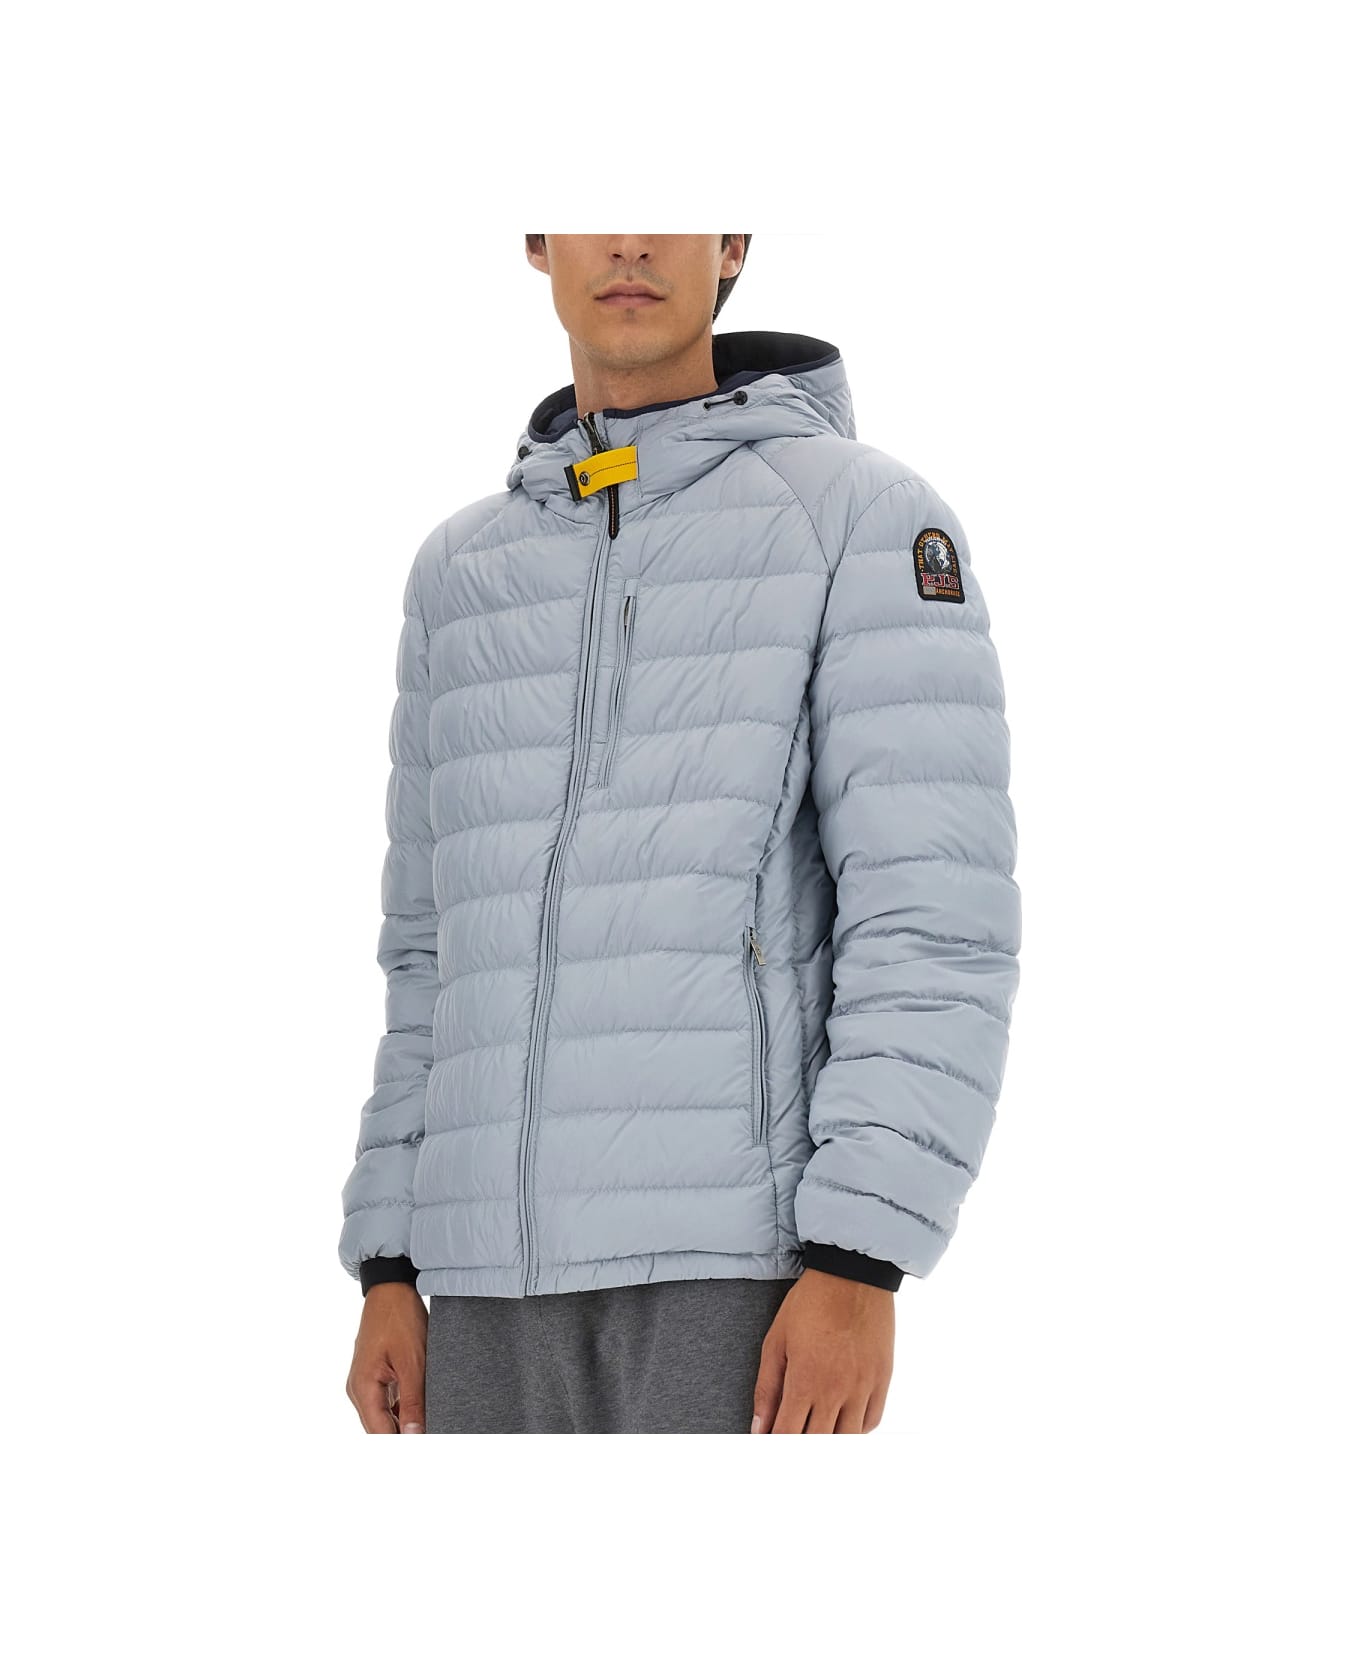 Parajumpers Reversible Jacket - BABY BLUE ジャケット